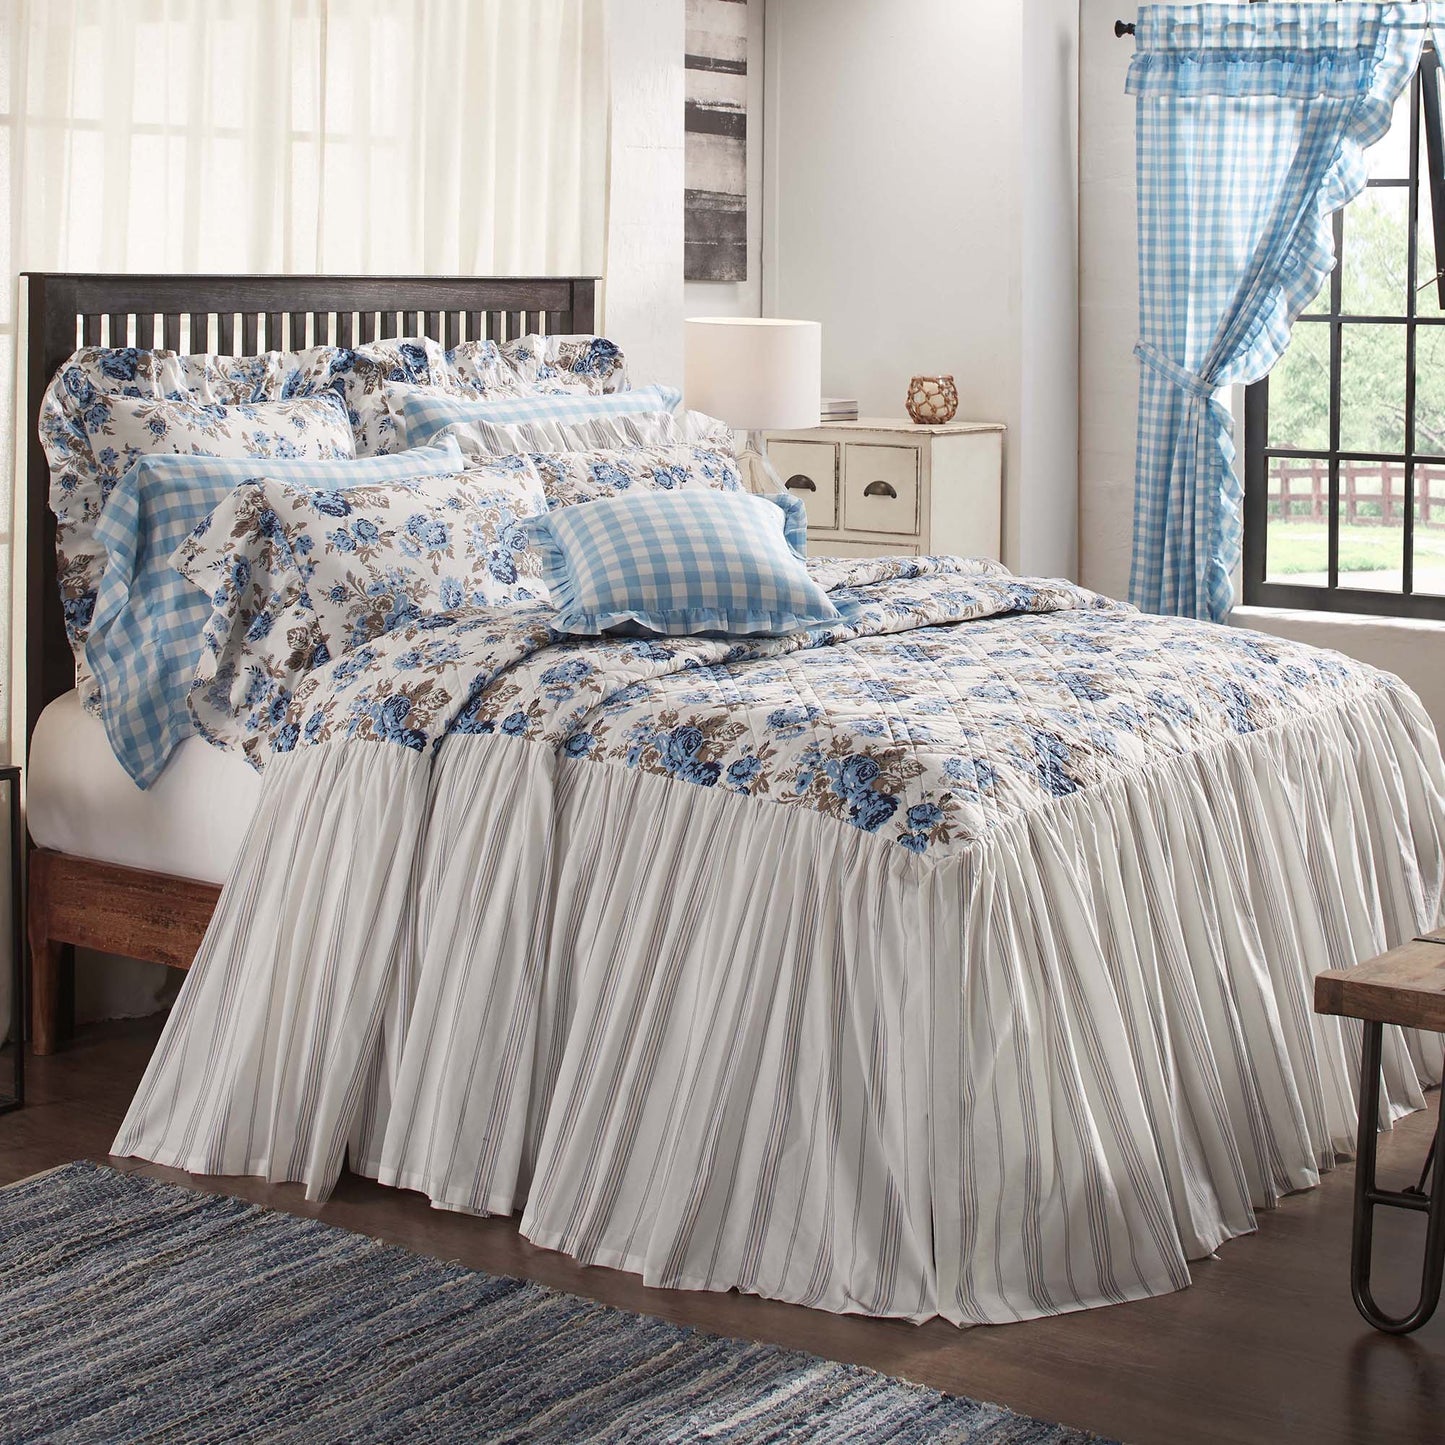 69995-Annie-Blue-Floral-Ruffled-Queen-Coverlet-80x60-27-image-3